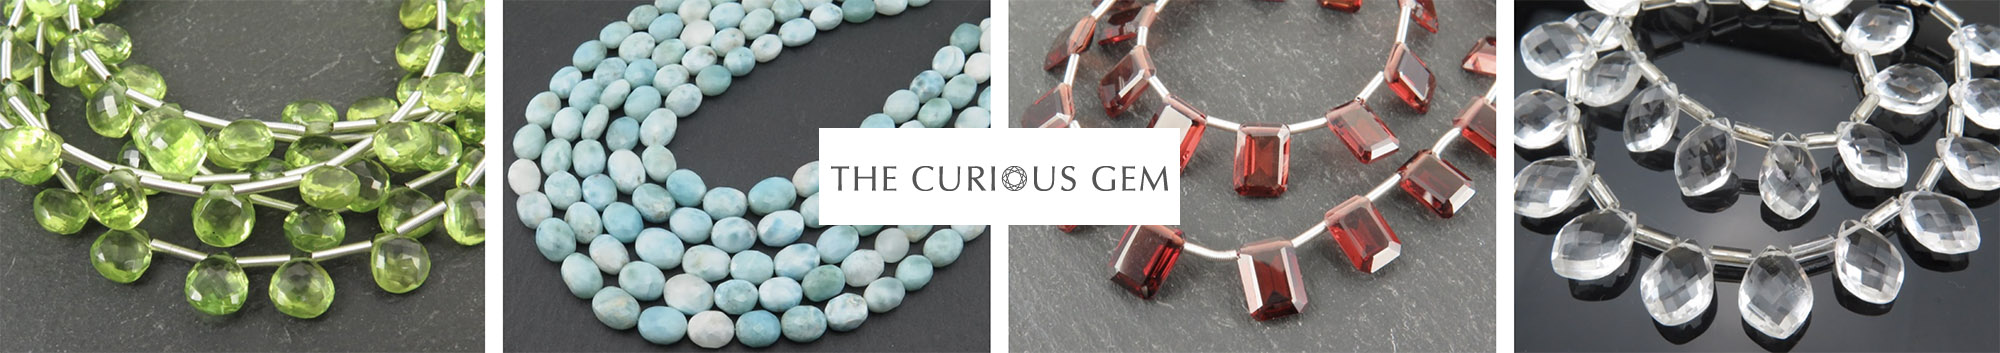 The Curious Gem banner image